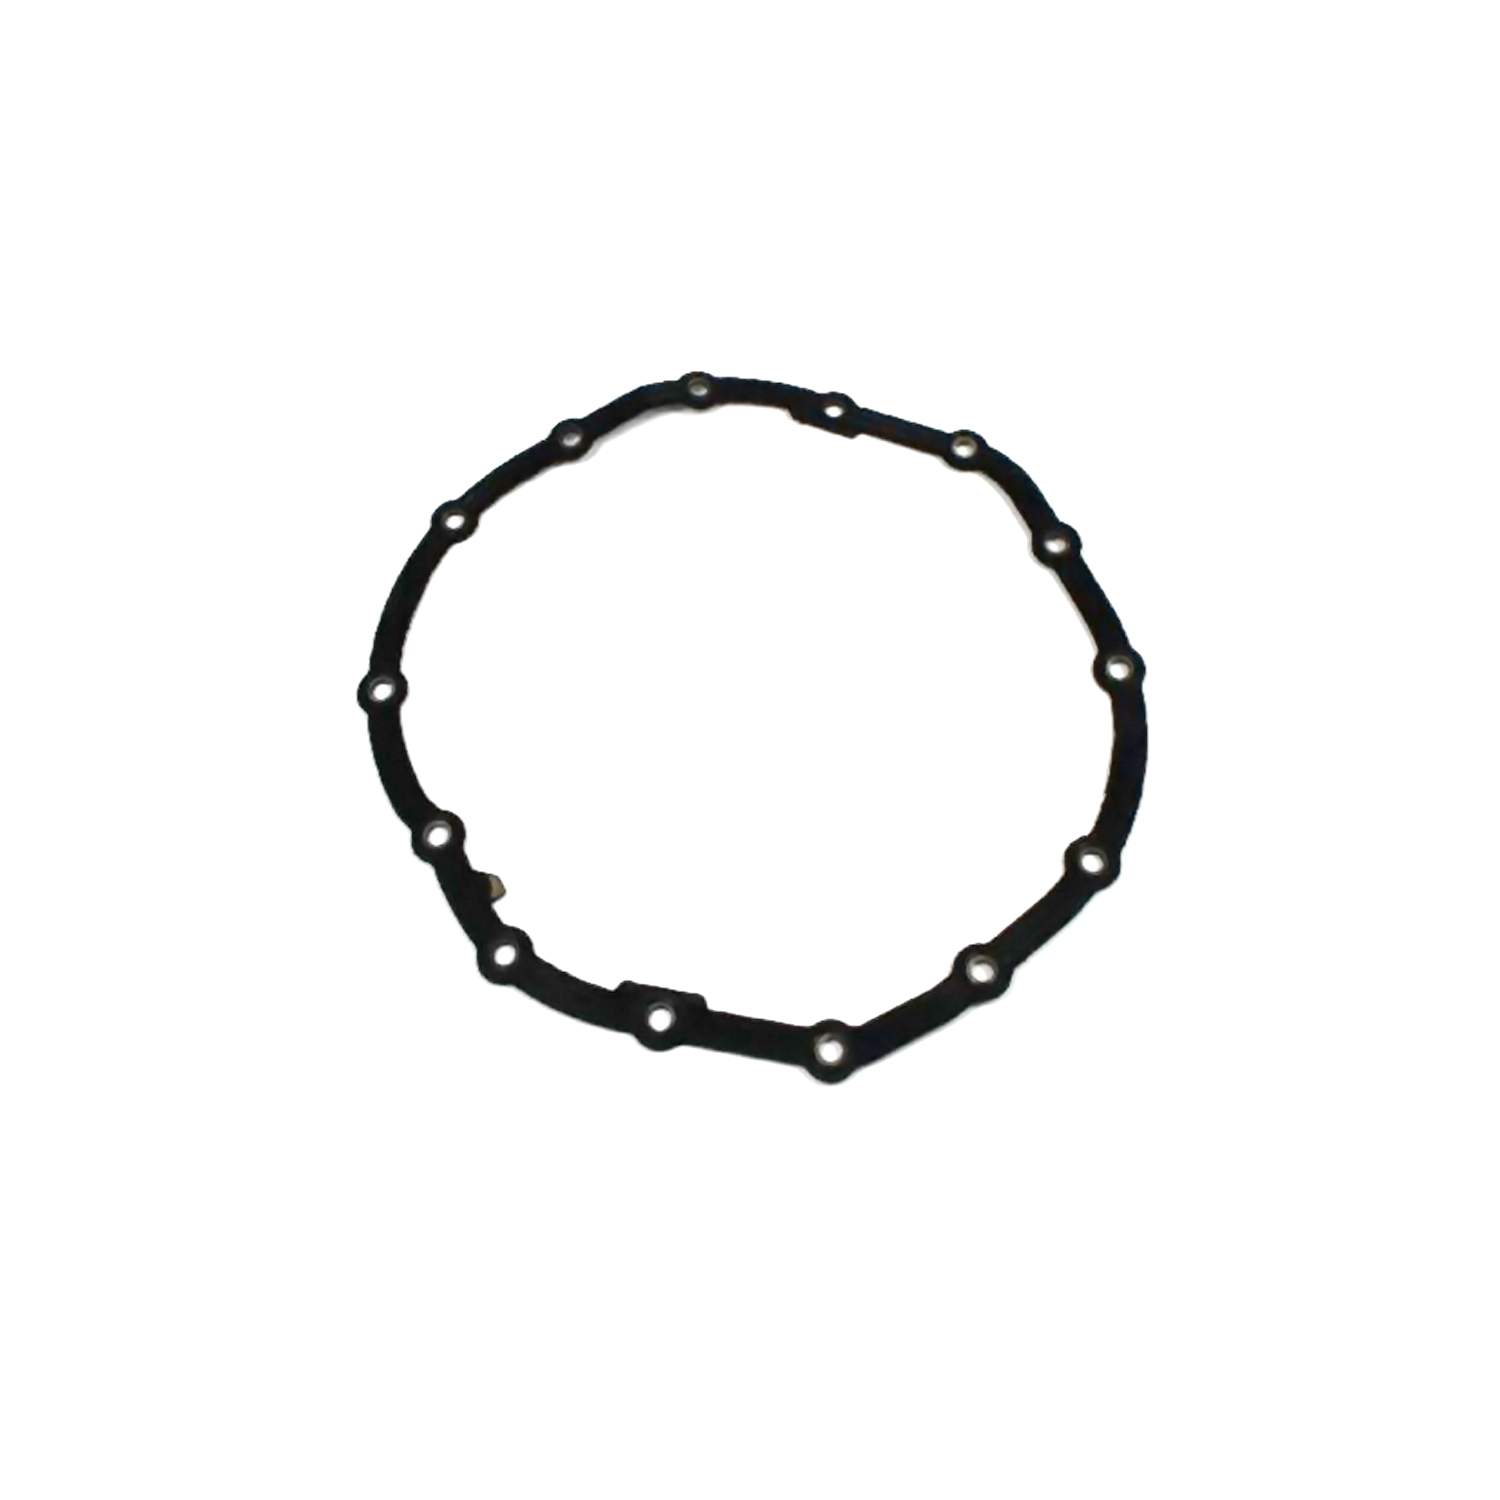 MOPAR BRAND - Auto Trans Differential Cover Gasket - MPB 5086682AA